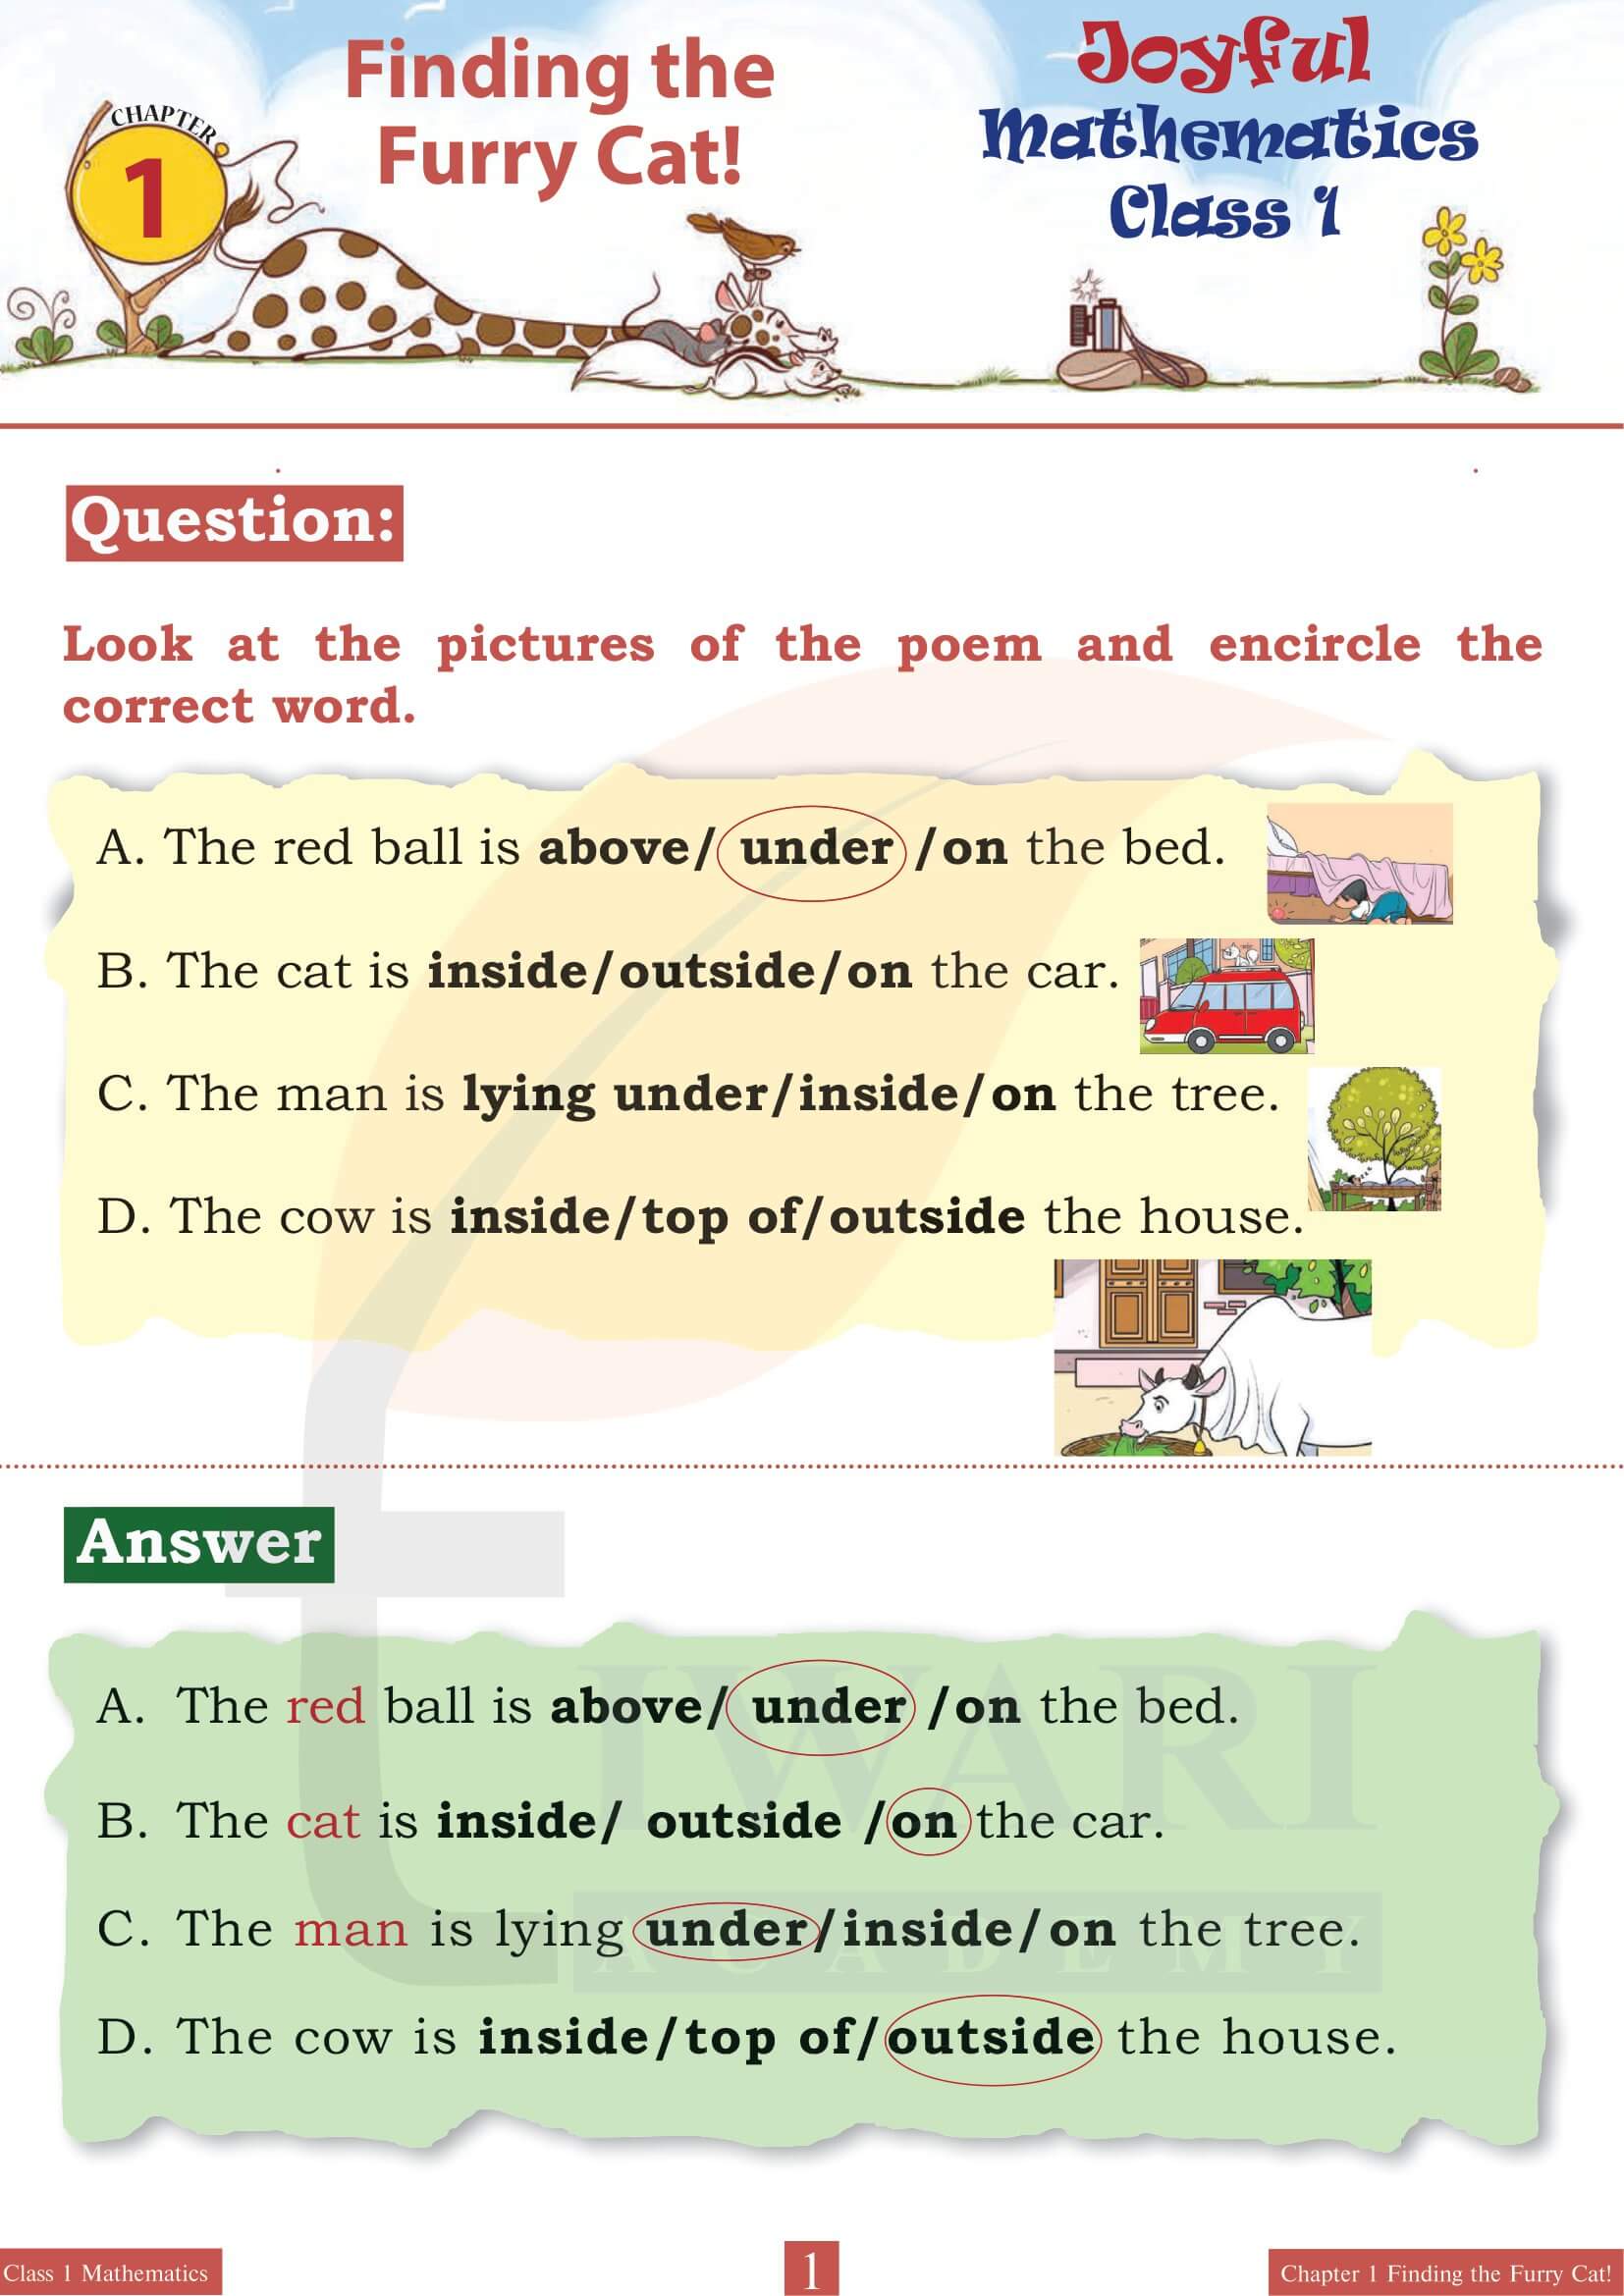 NCERT Solutions for Class 1 Maths Chapter 1 Finding the Furry Cat